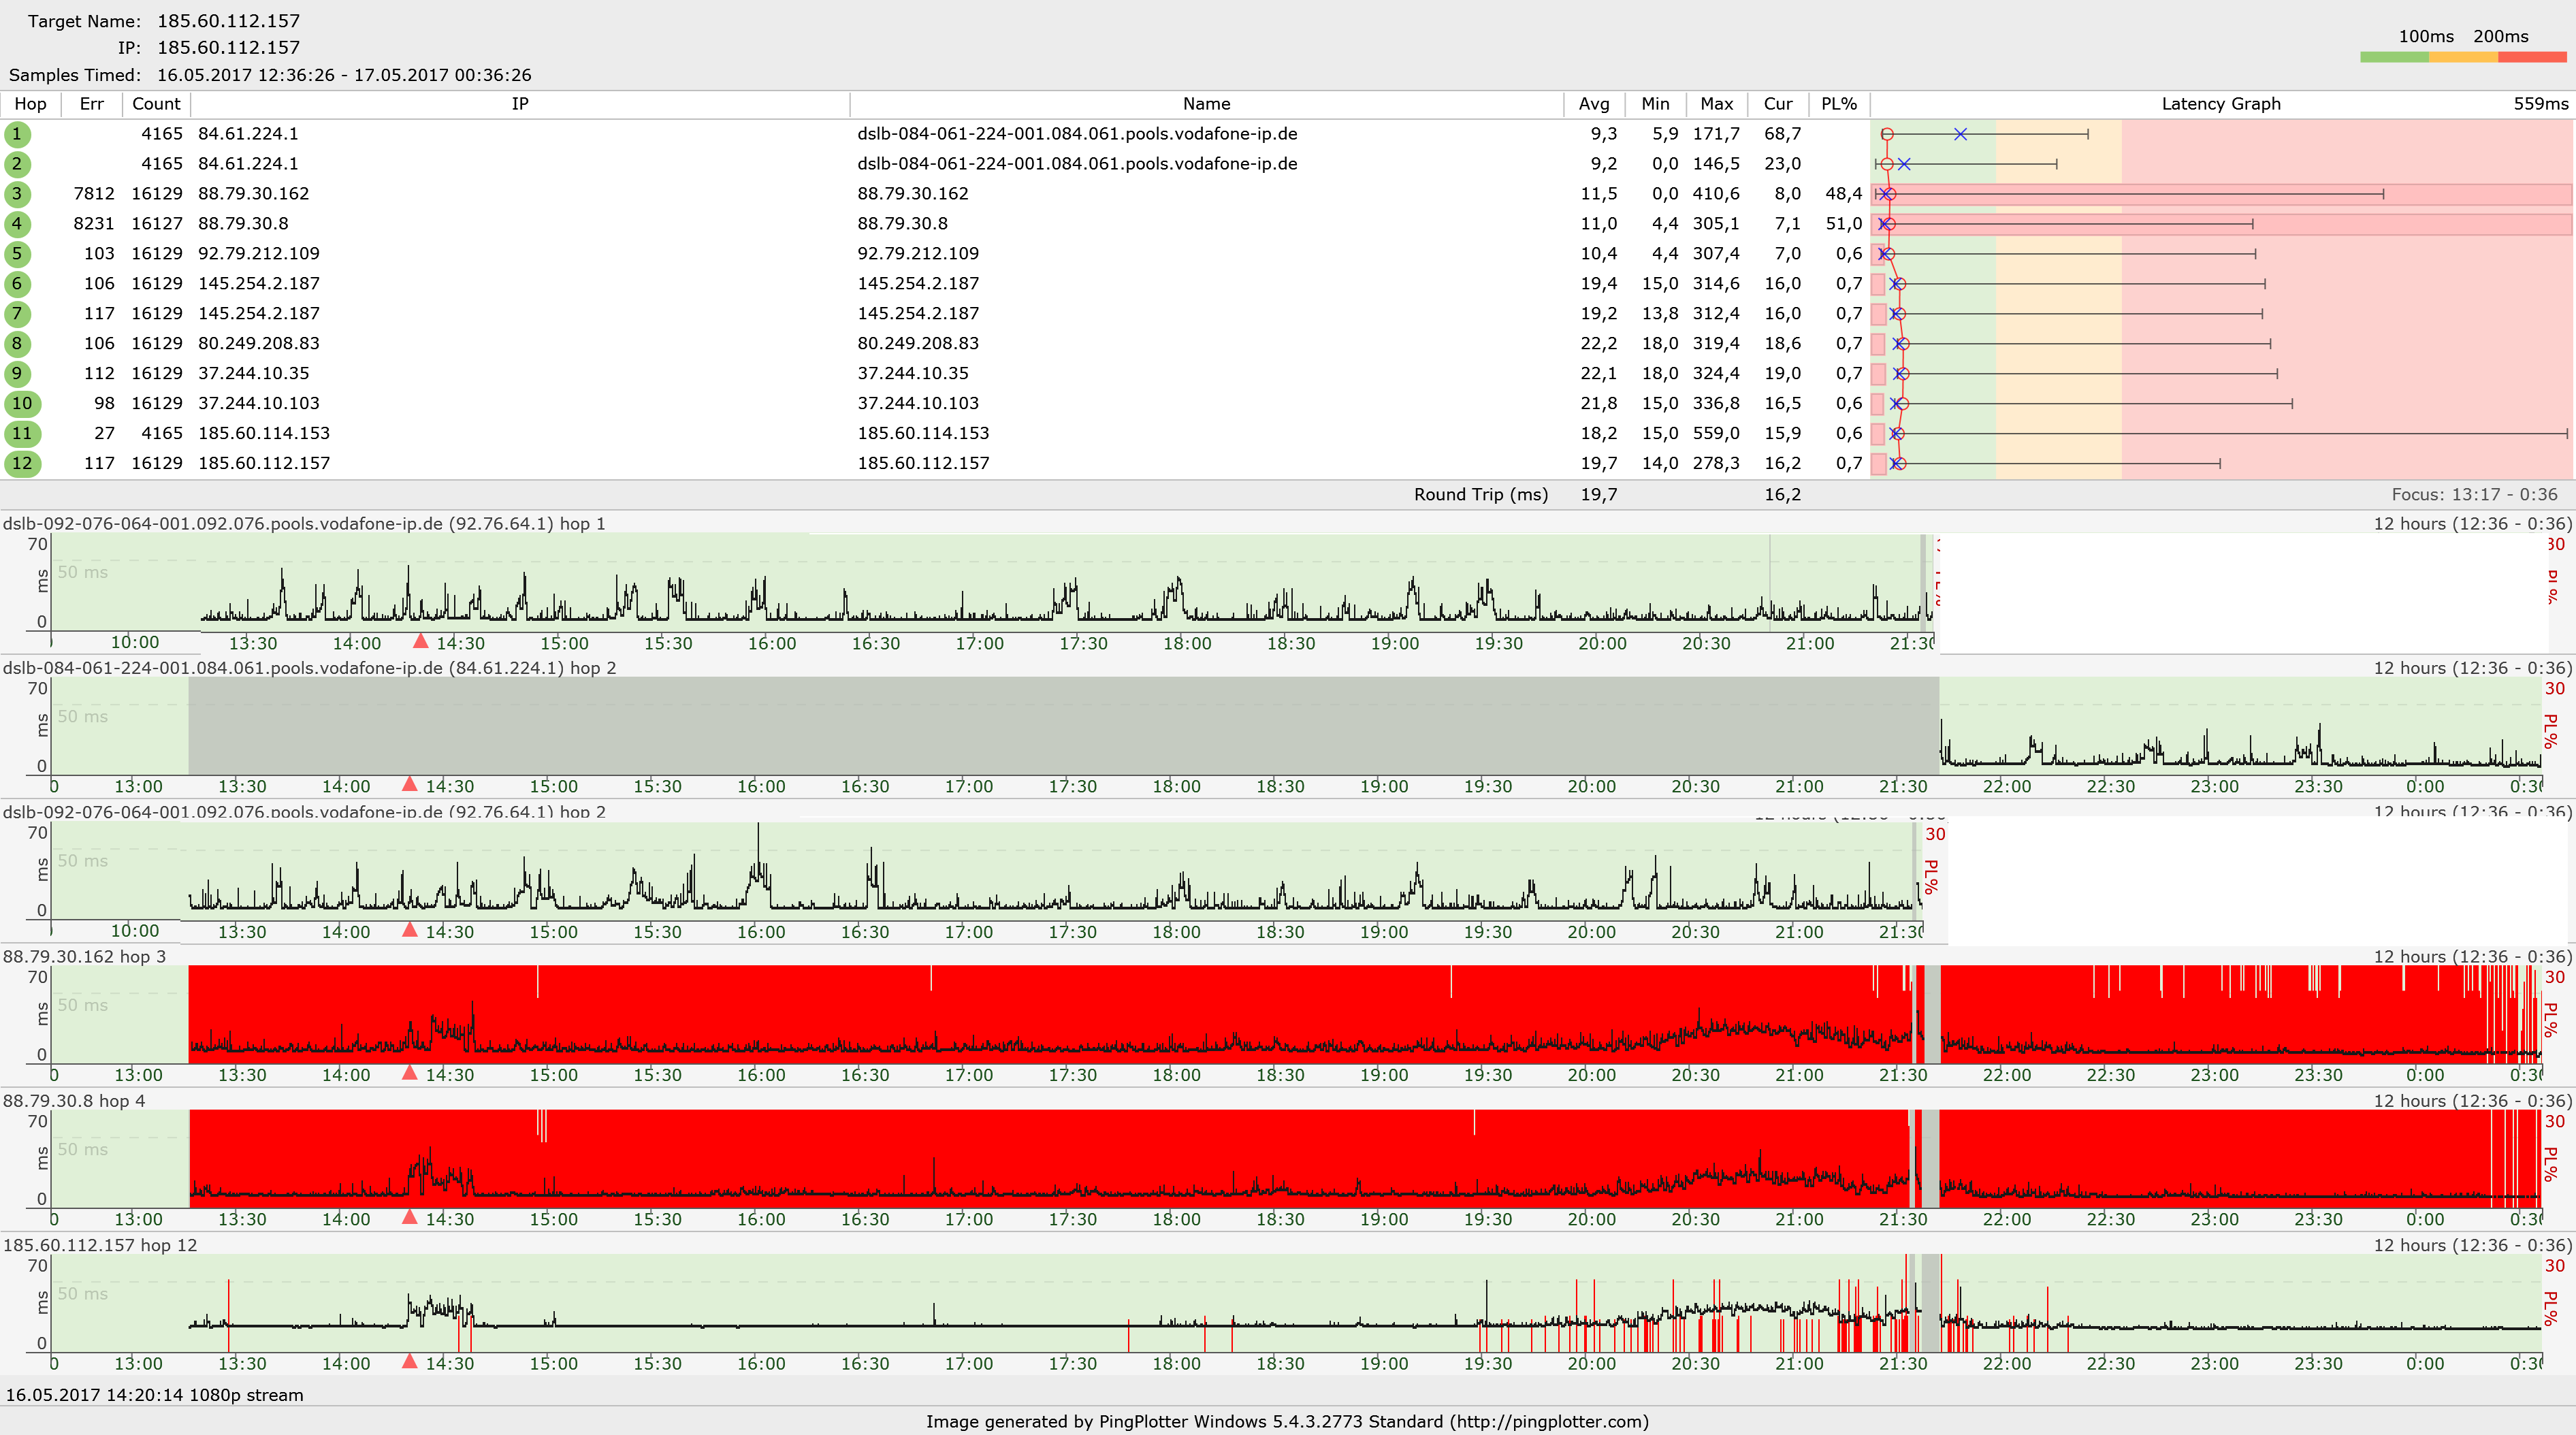 pingplotter 1 second interval causes packet loss